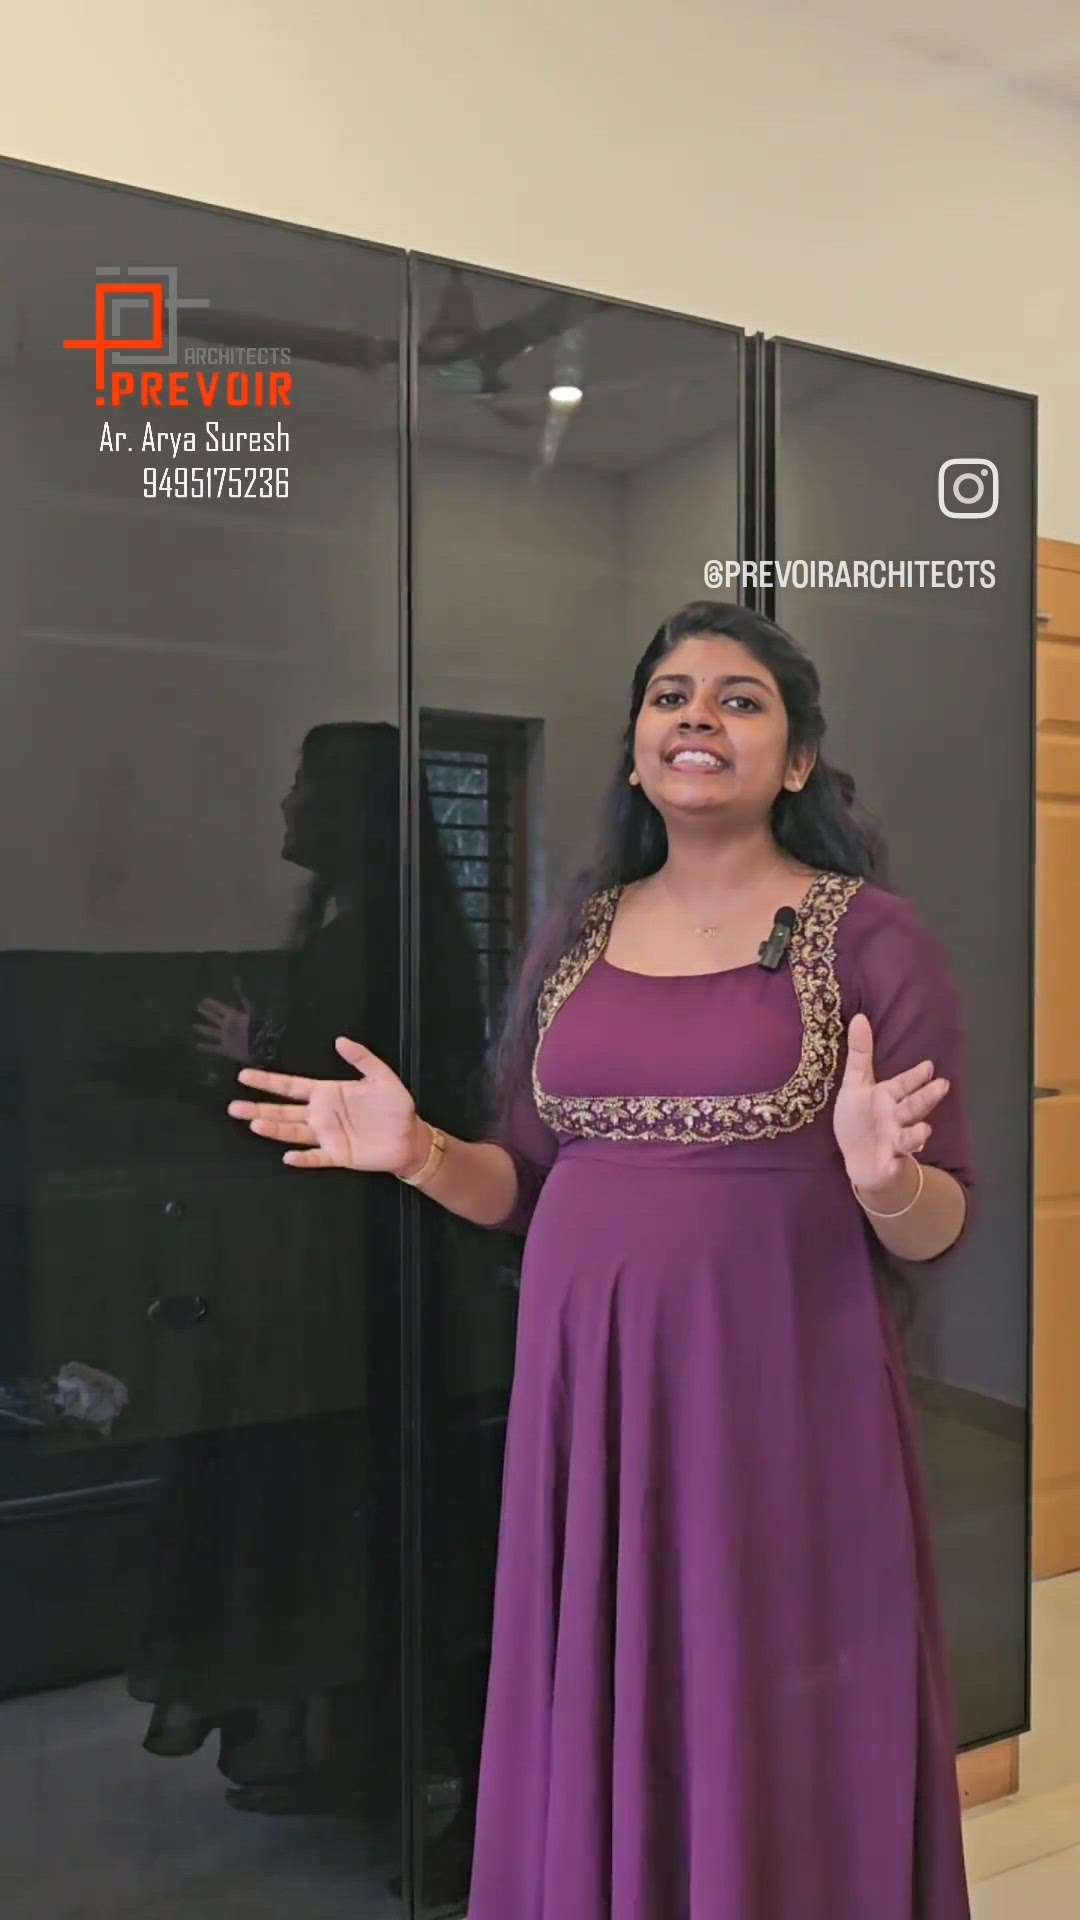 Wardrobes with glass shutters 
Toughned Glass Wardrobes with profile handles in interior design ✨️
.
.
.
.
.
.
#tips 
#glasswardrobes #glassdoor #modularwork #InteriorDesignIdeas #designtips #aluminumprofile #ebco #toughned glass #instagram #carpenter #interiorwork #viralvideo